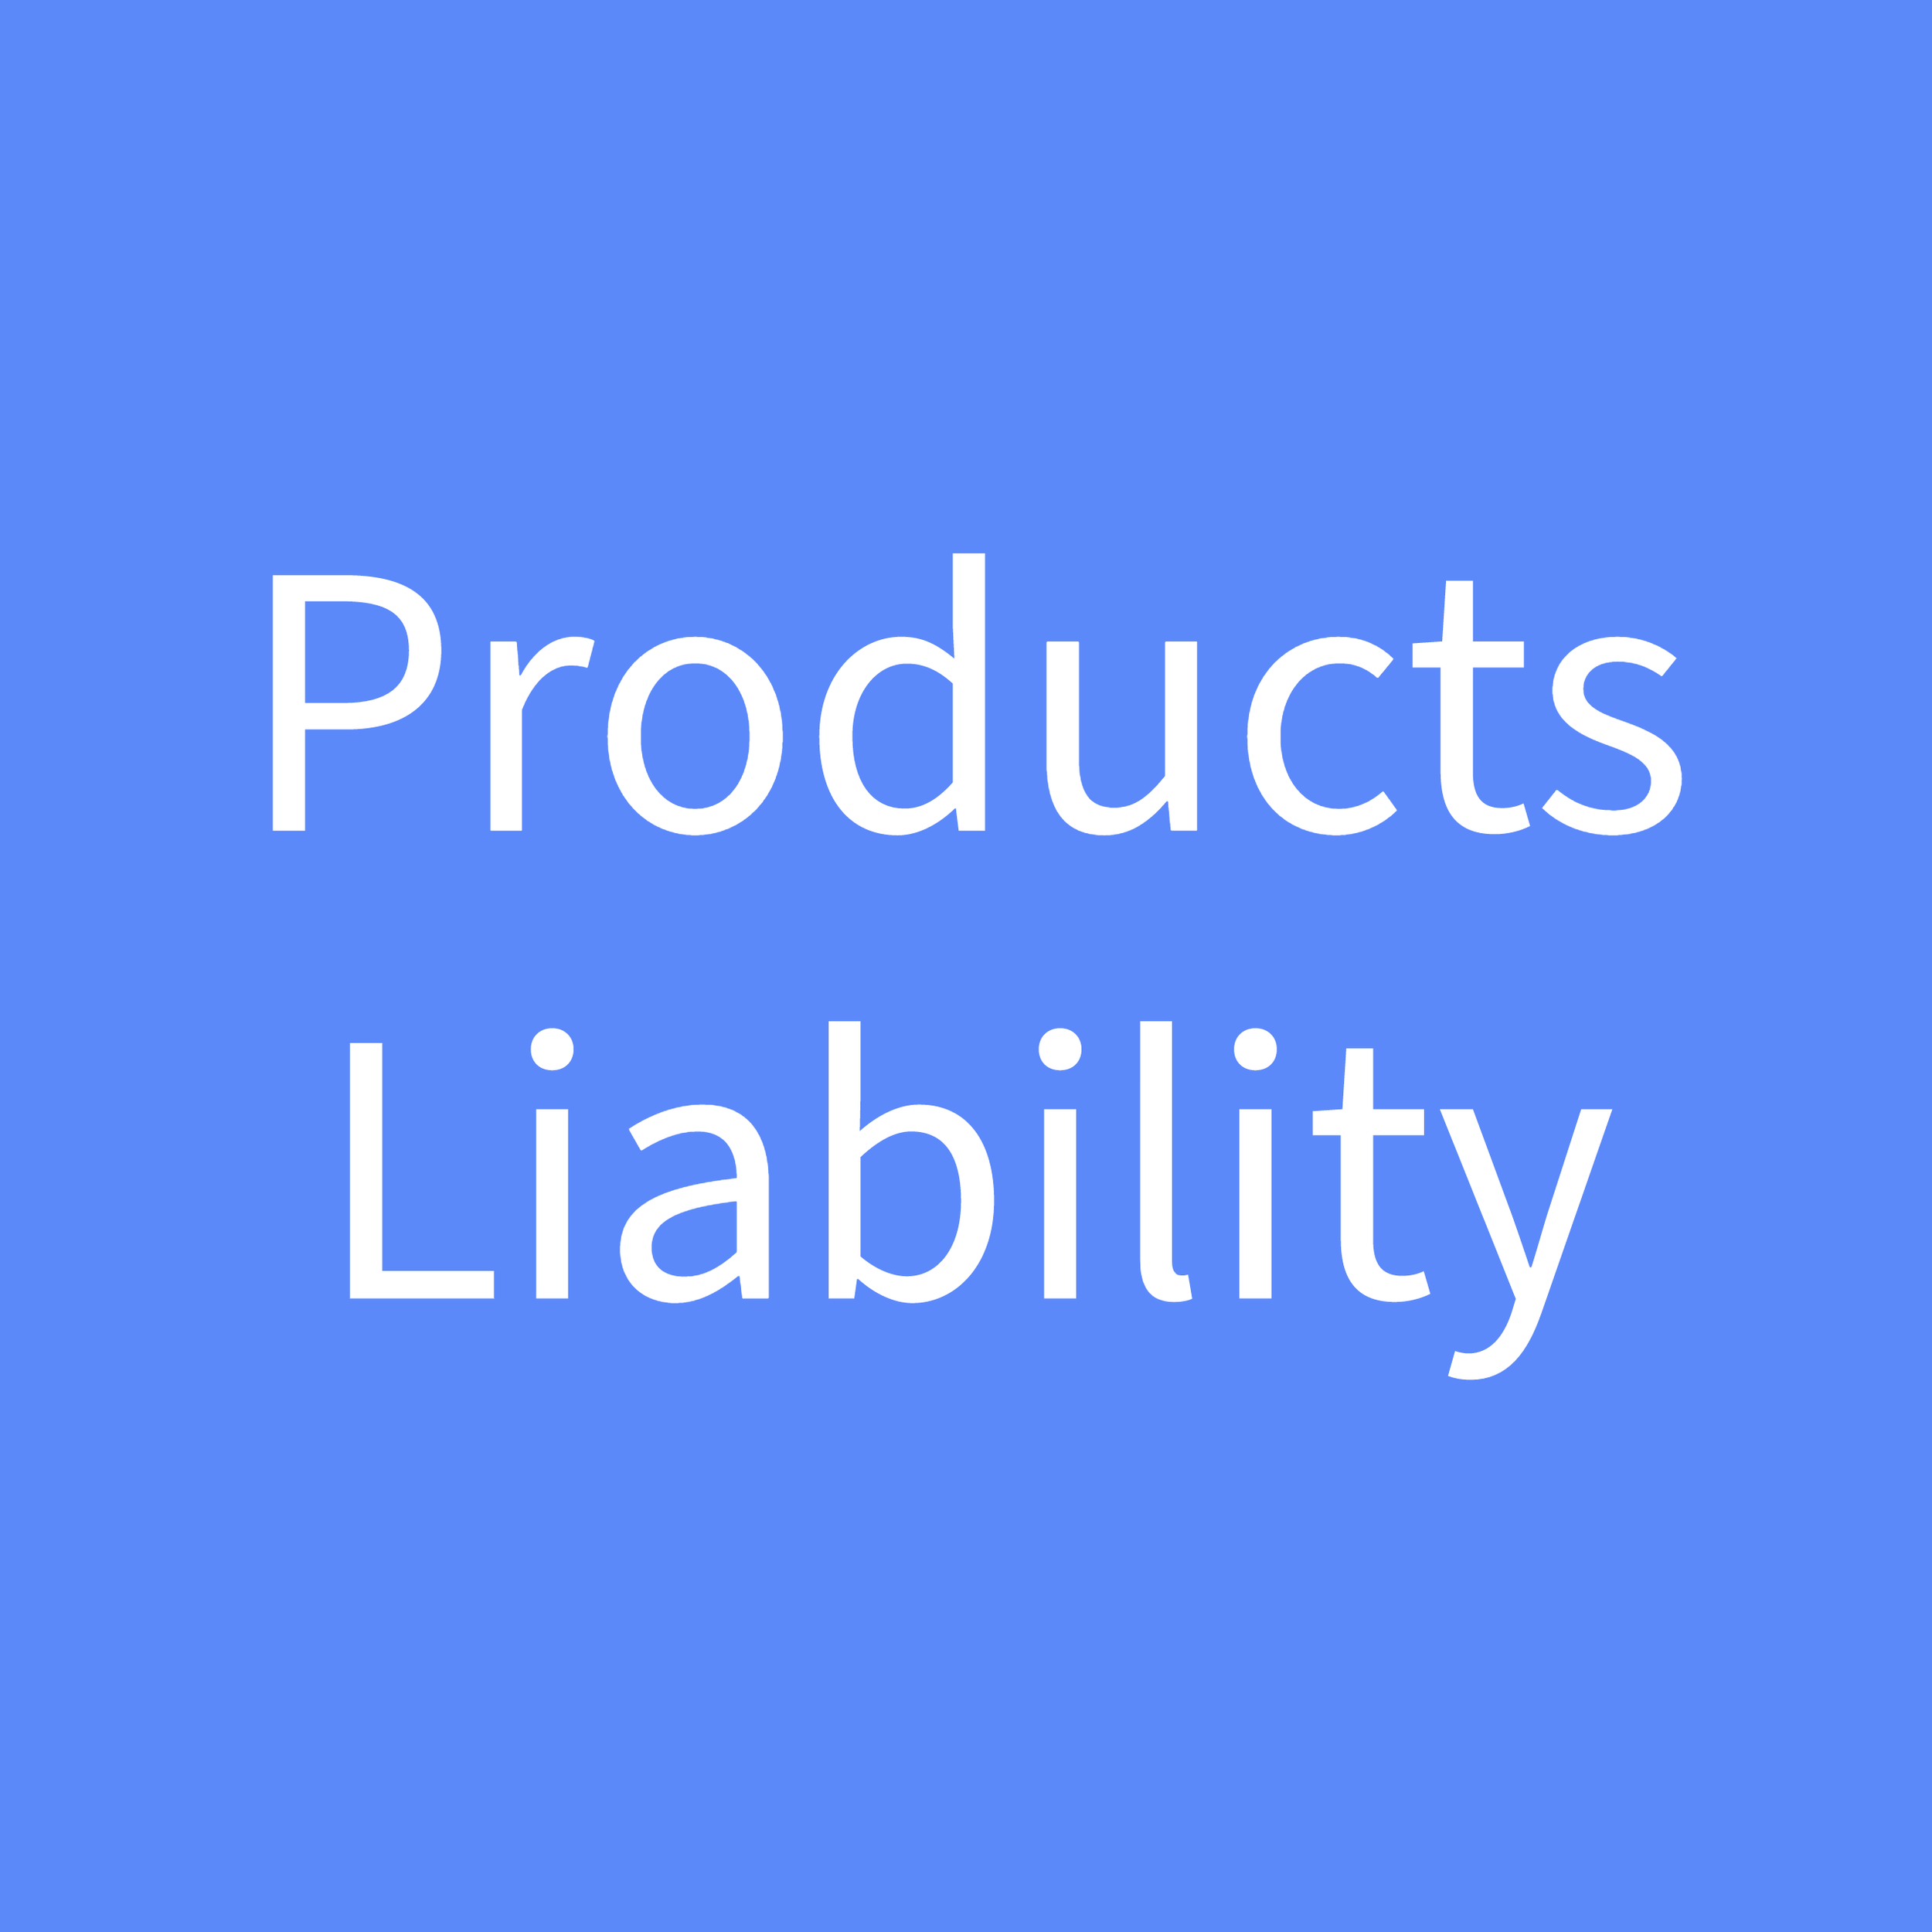 Products Liability 